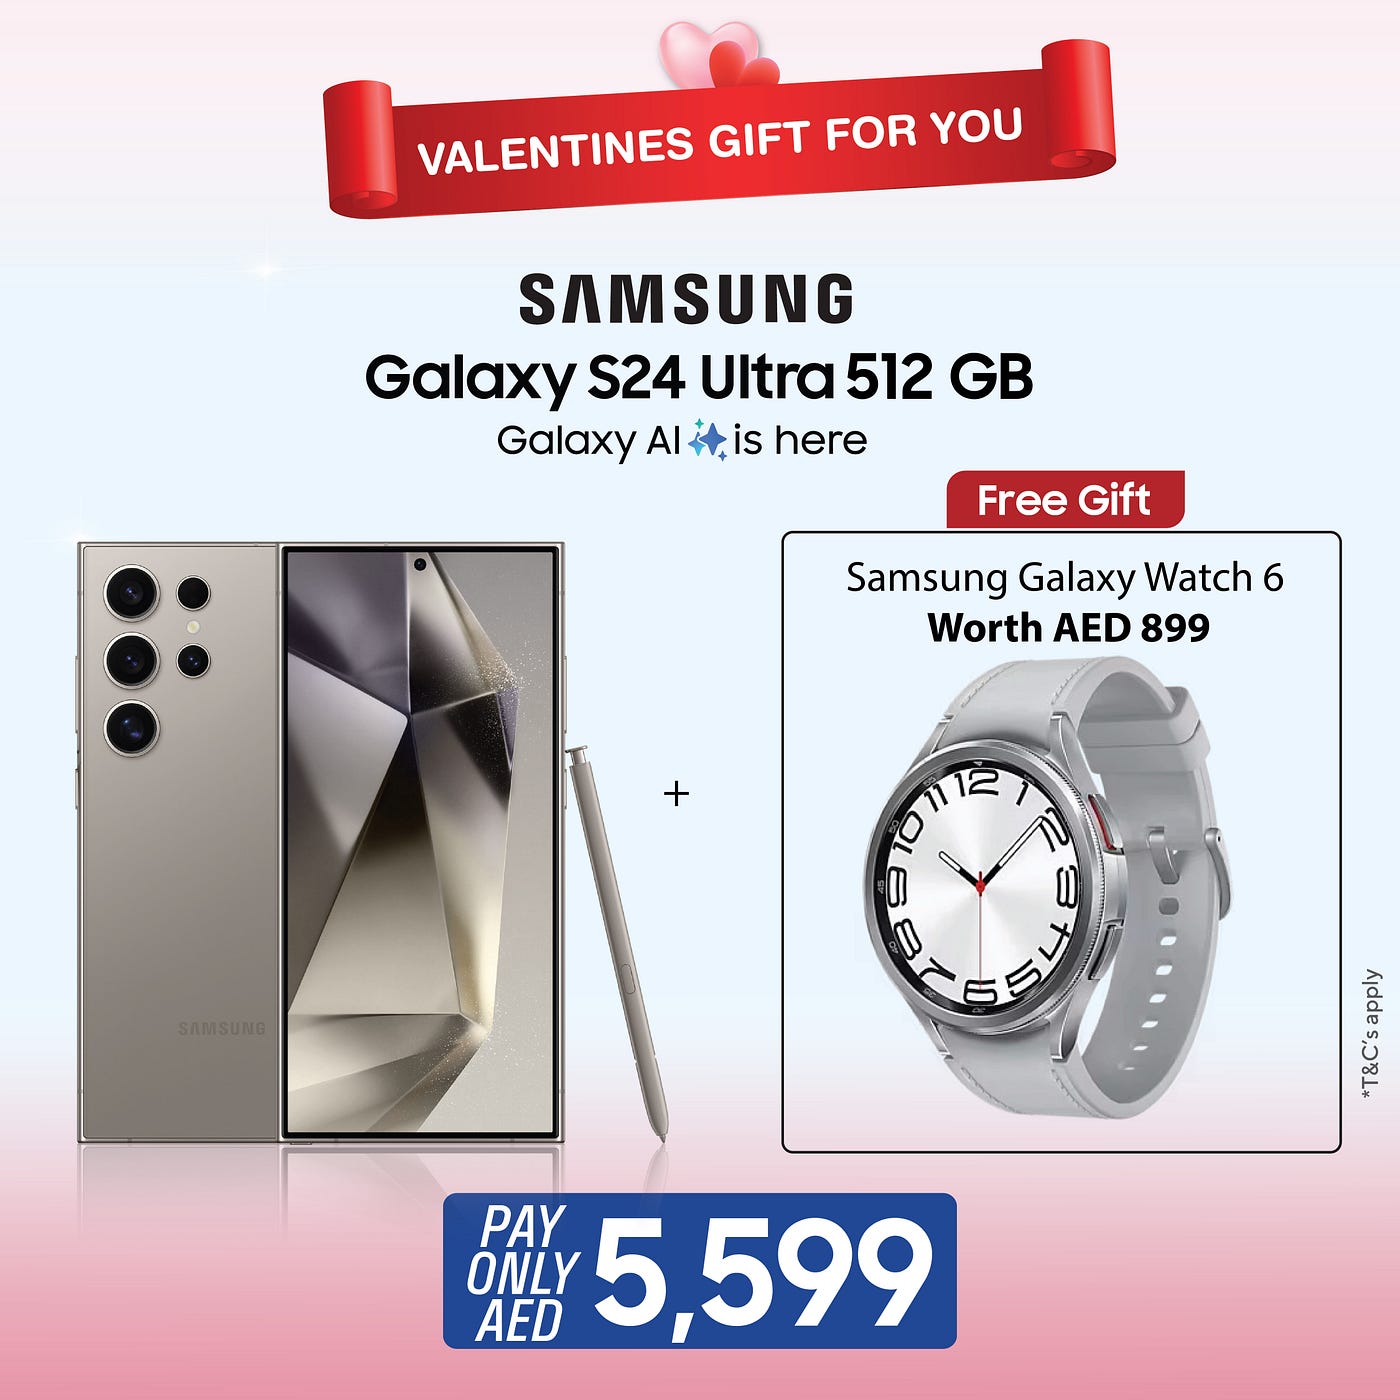 Valentine's Day Tech Treat: Free Samsung Galaxy Watch 6 with Galaxy S24  Ultra 512GB Purchase at ECity, by AbuAdventures, Feb, 2024